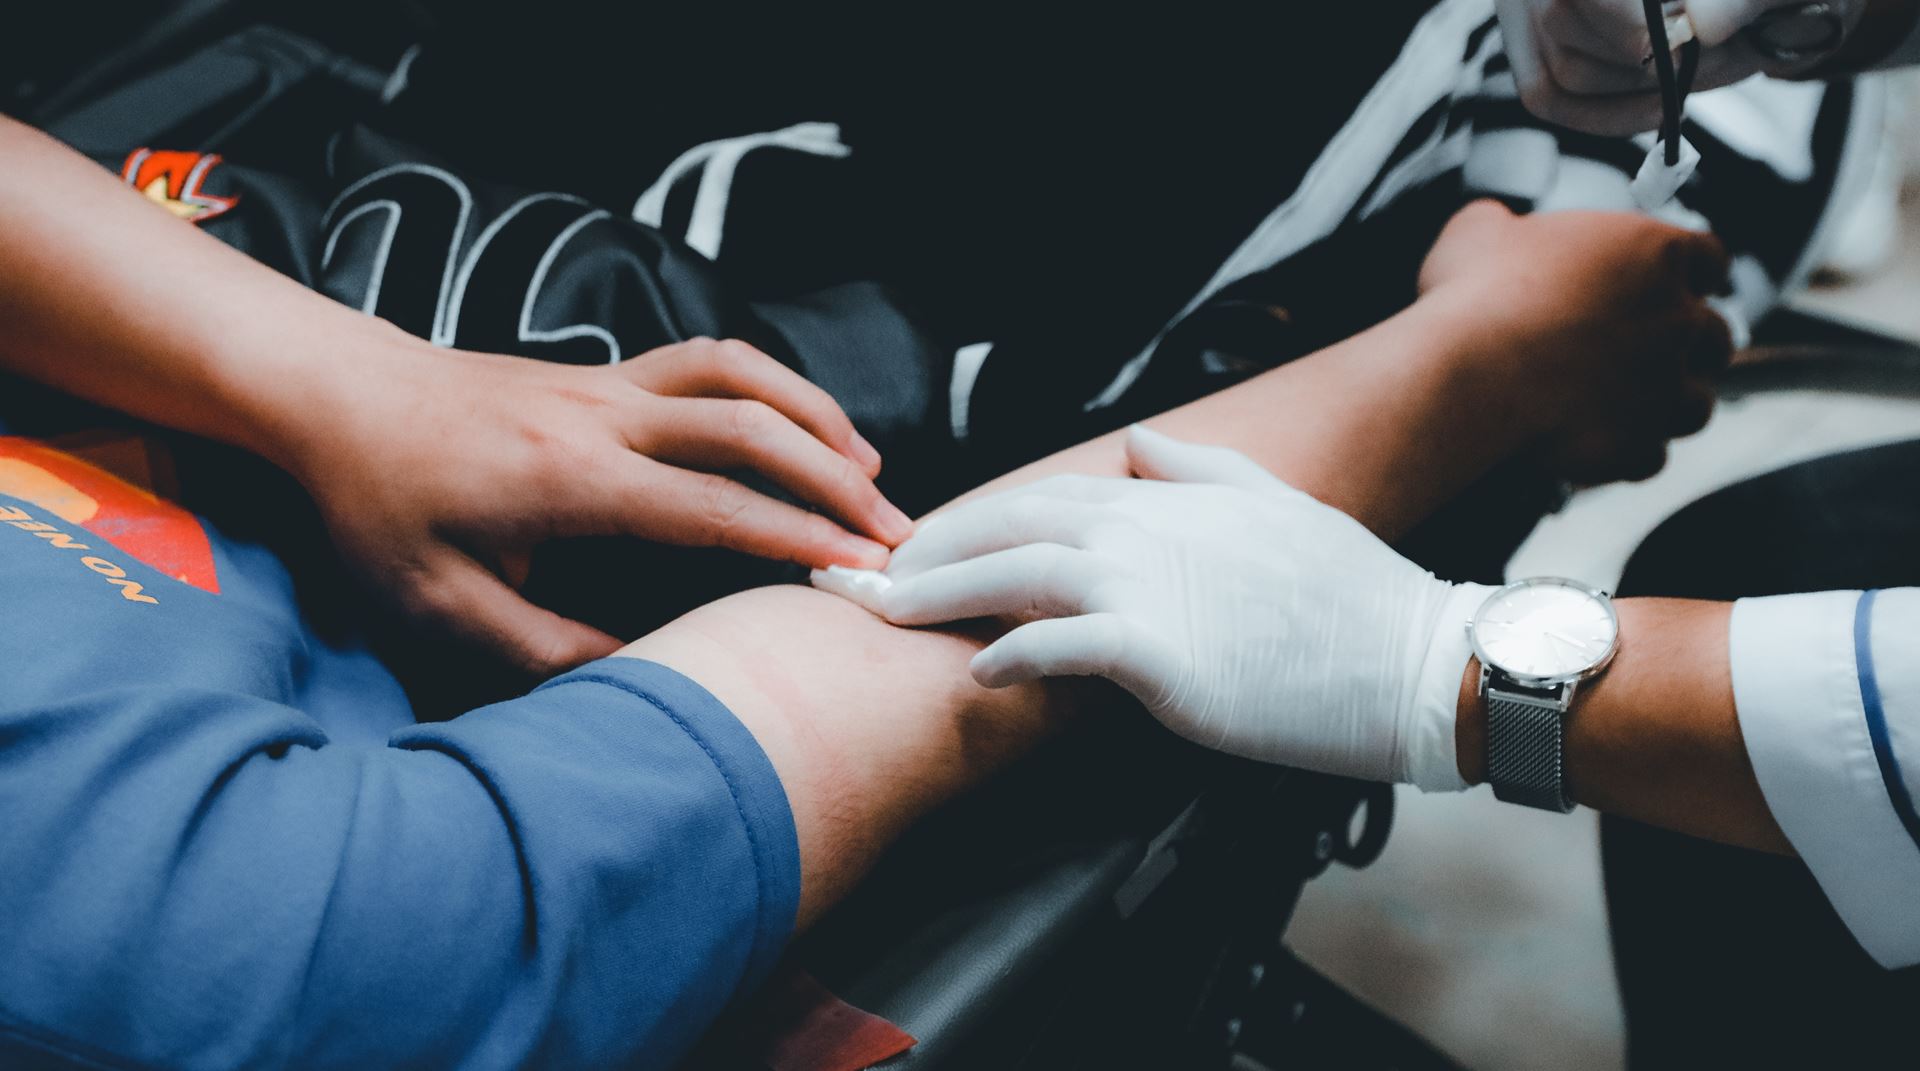 A phlebotomist wearing gloves feels a patient's arm to check for a vein